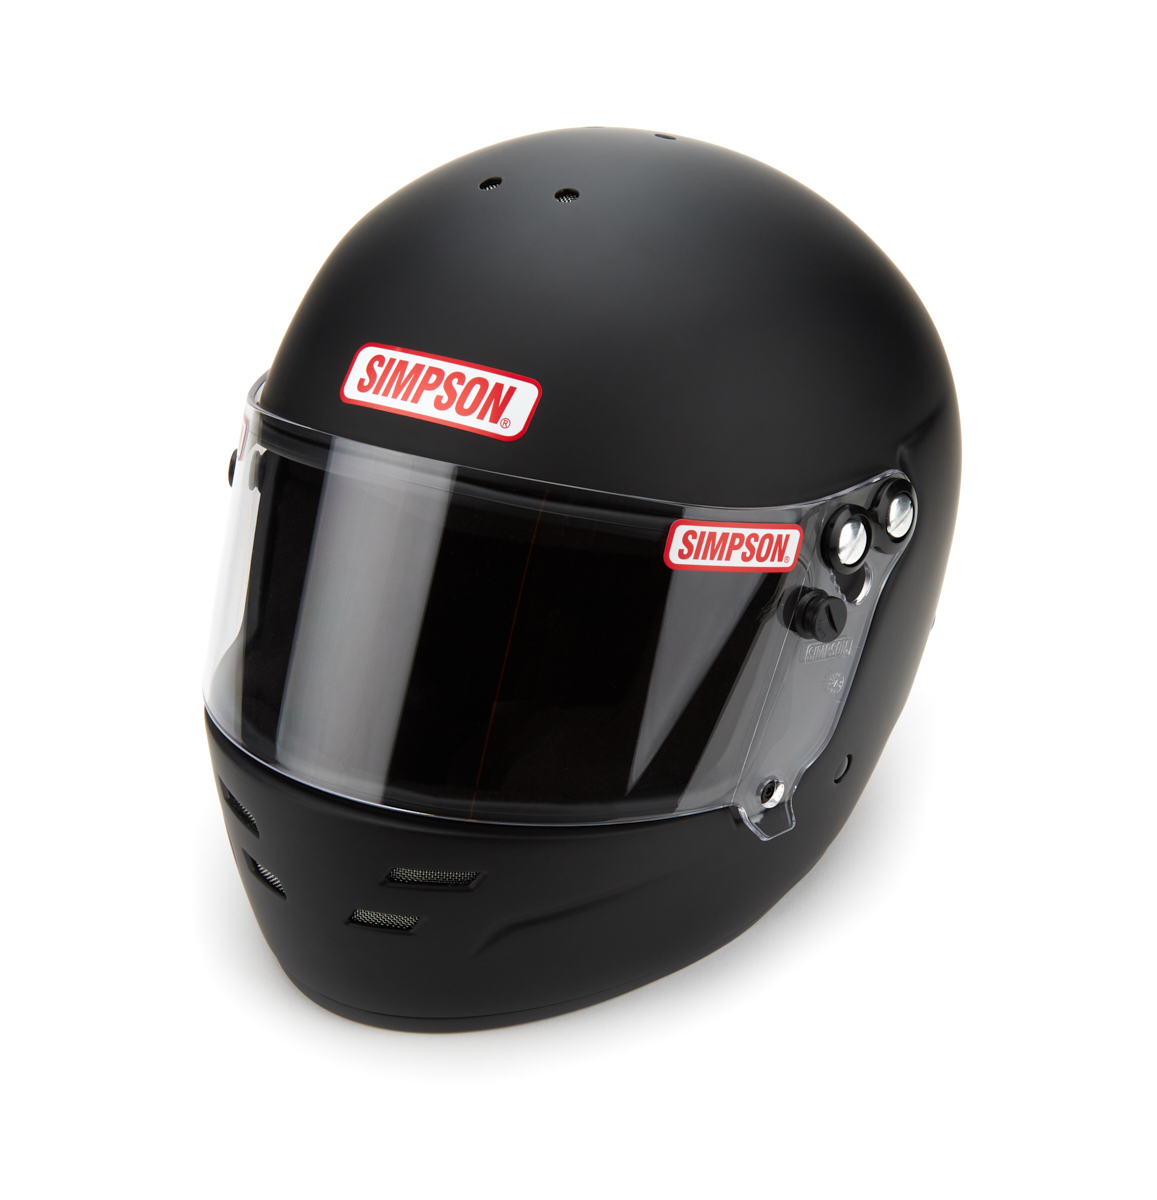 Simpson Safety 7100038 Helmet, Viper, Full Face, Snell SA2020, Head and Neck Support Ready, Flat Black, Large, Each